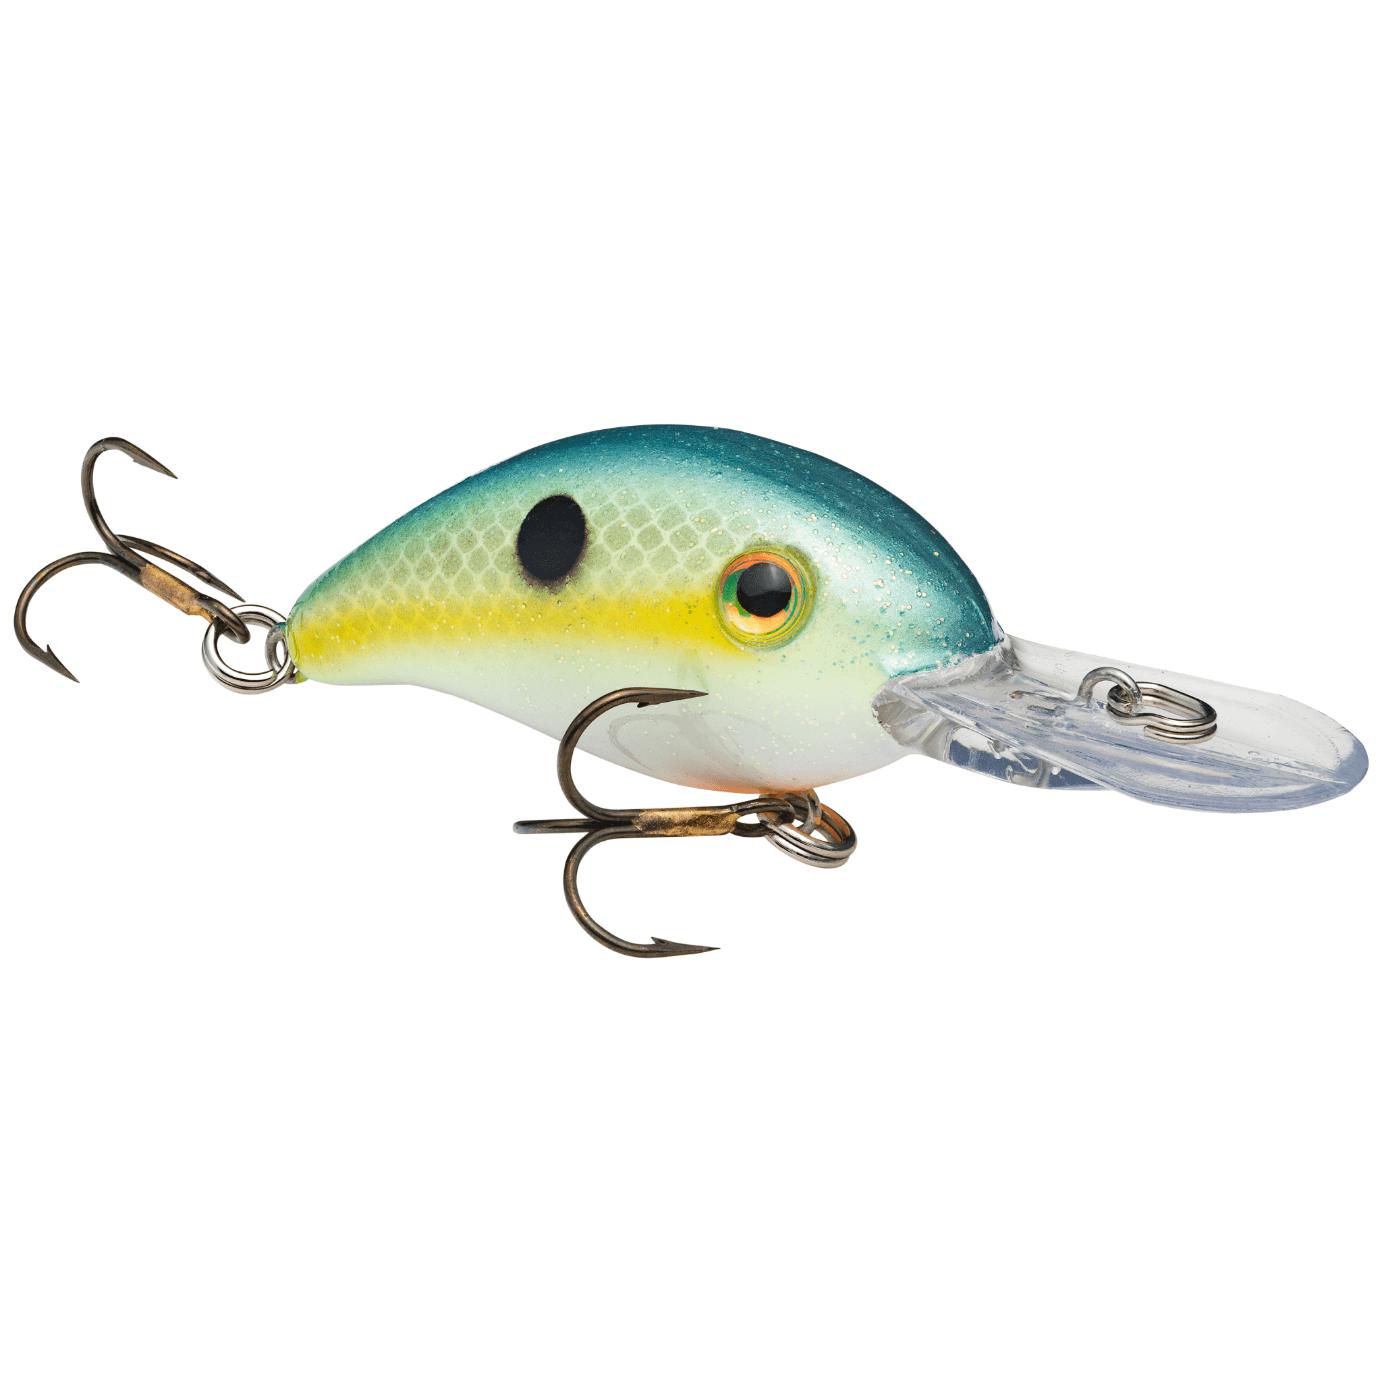 Strike King Pro-Model 3 Chartreuse Sexy Shad